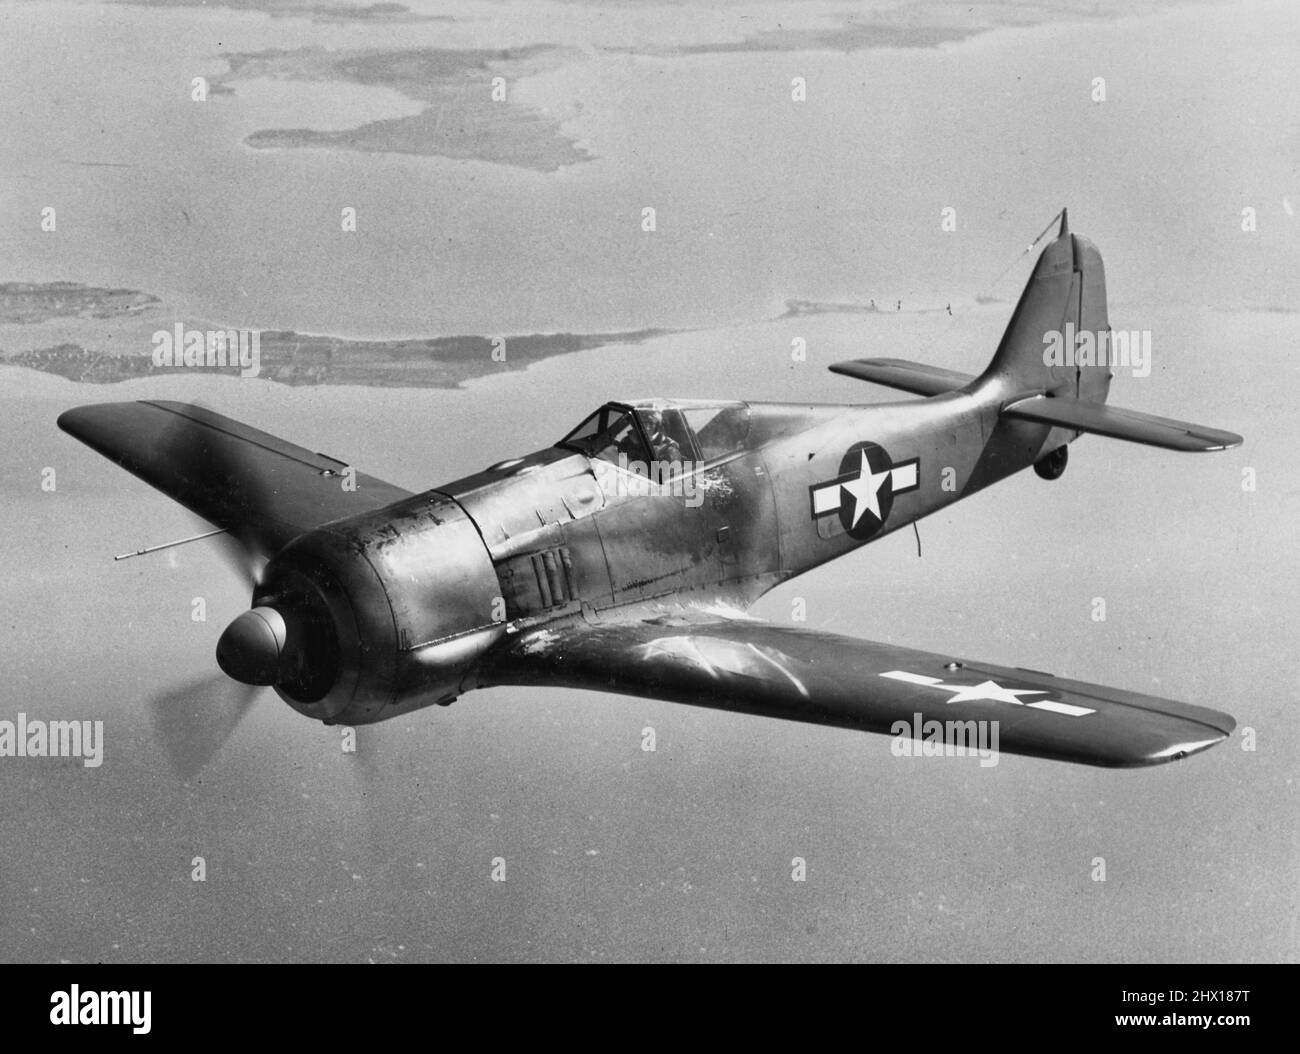 A captured German Focke-Wulf Fw 190 fighter tested by the U.S. Navy Naval Air Test Center Patuxent River, Maryland (USA), circa in March 1944. The aircraft received U.S. markings and a standard U.S. Navy camouflage, with the armament apparently removed. Stock Photo